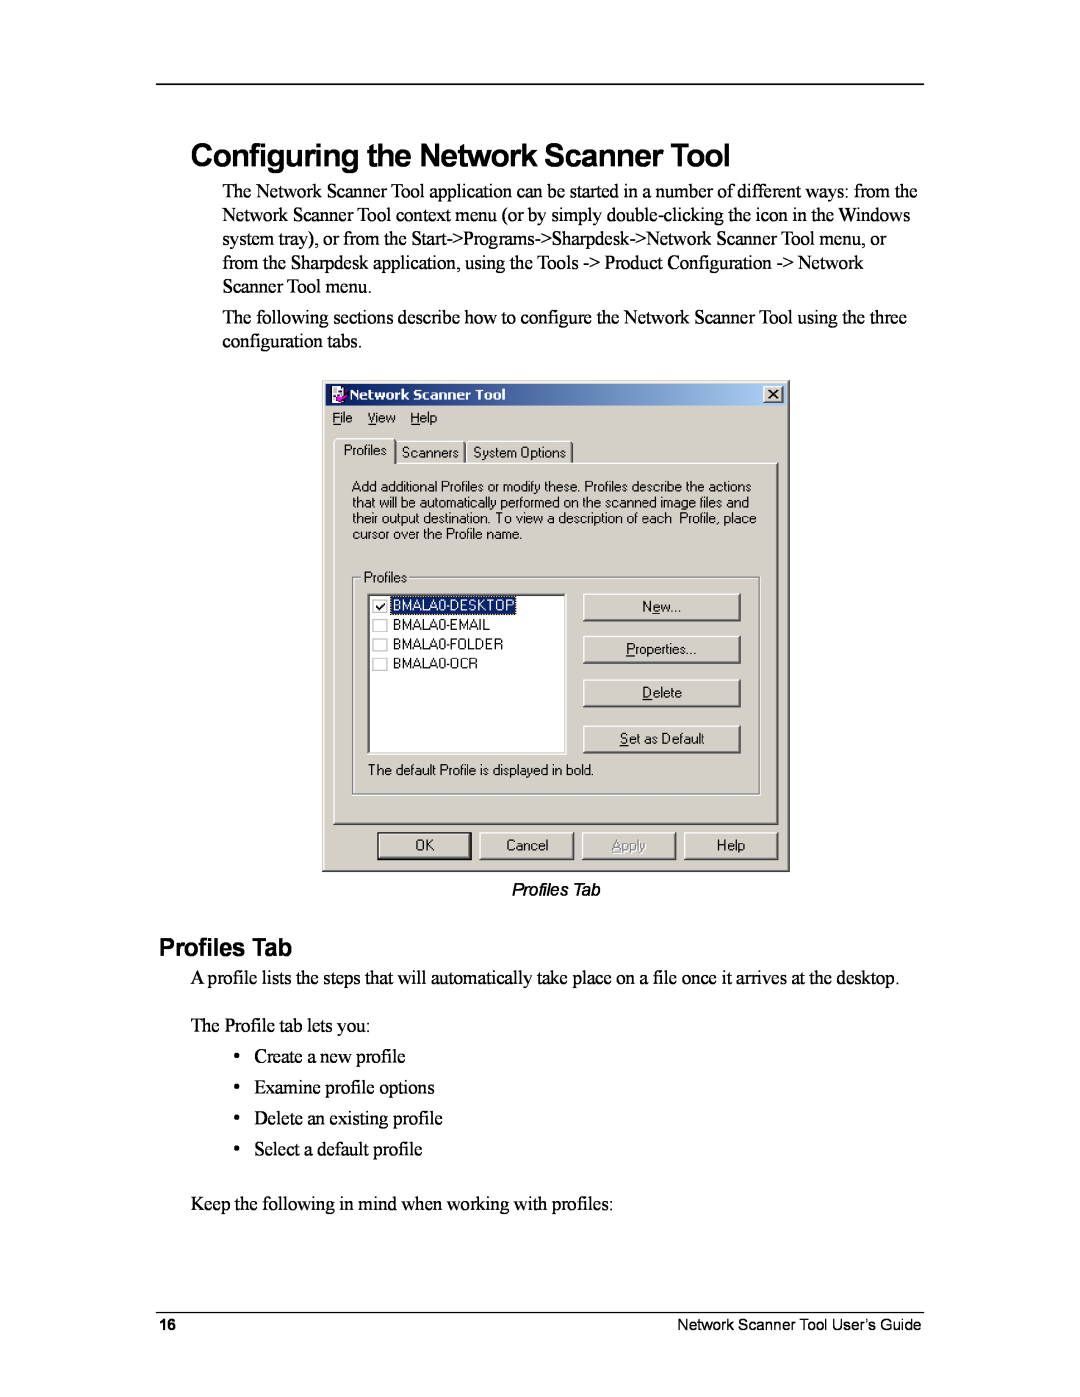 Sharp R3.1 manual Configuring the Network Scanner Tool, Profiles Tab 